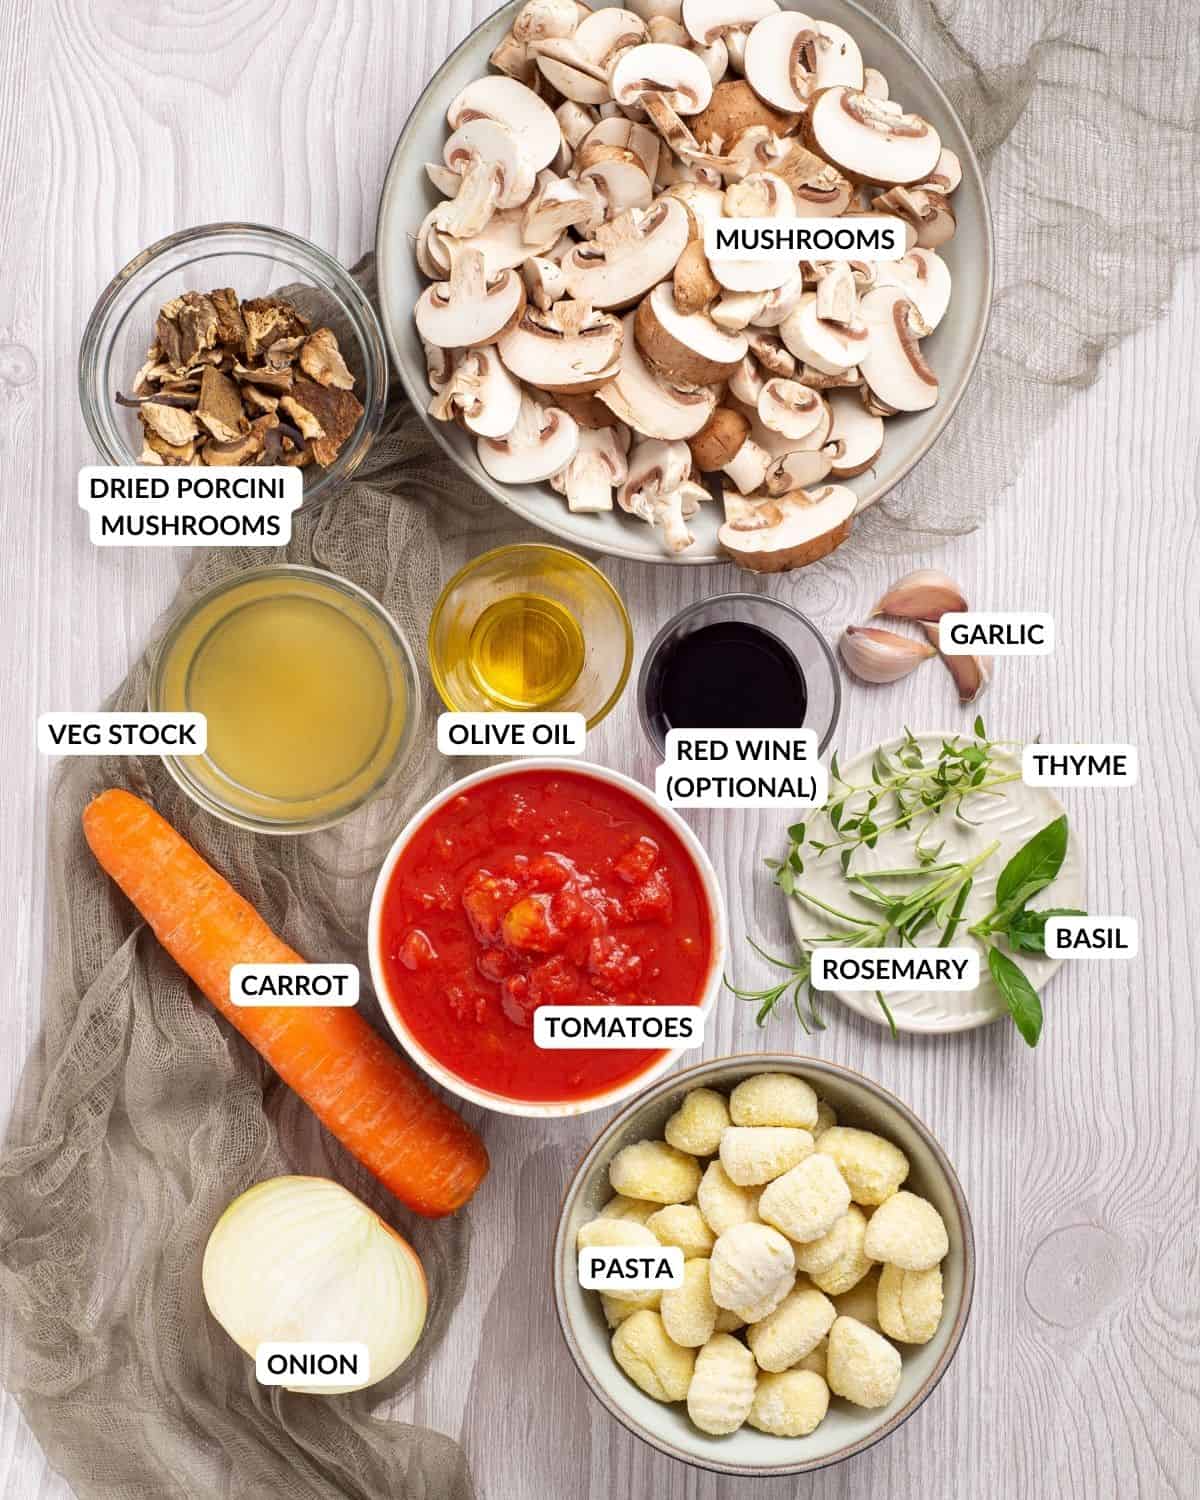 An image of the ingredients of mushroom ragu in separate bowls with labels.